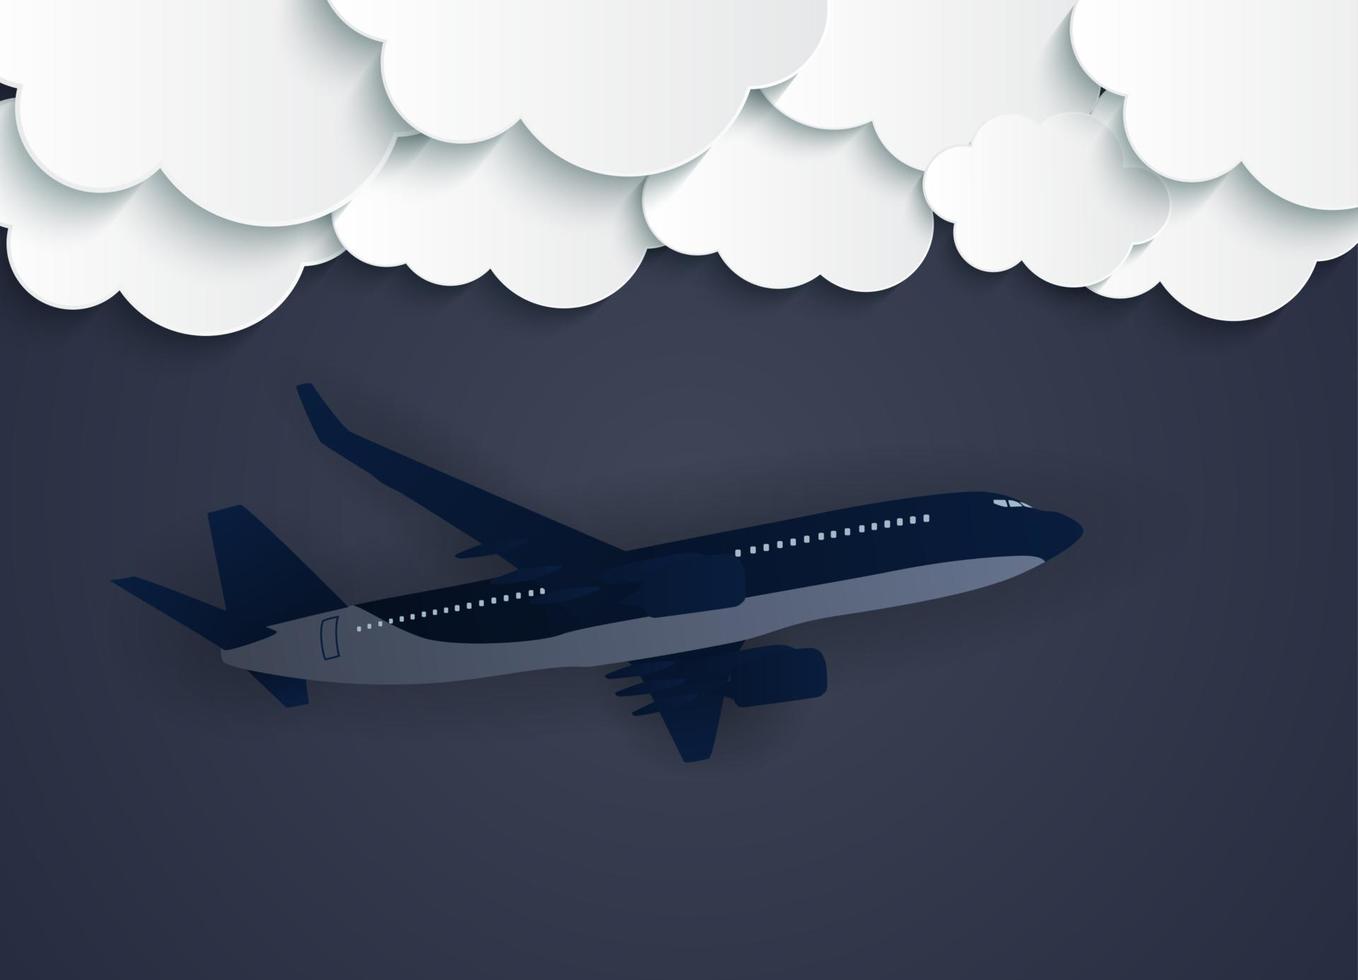 Abstract Clouds with flying realistic 3D airplane Vector Illustration